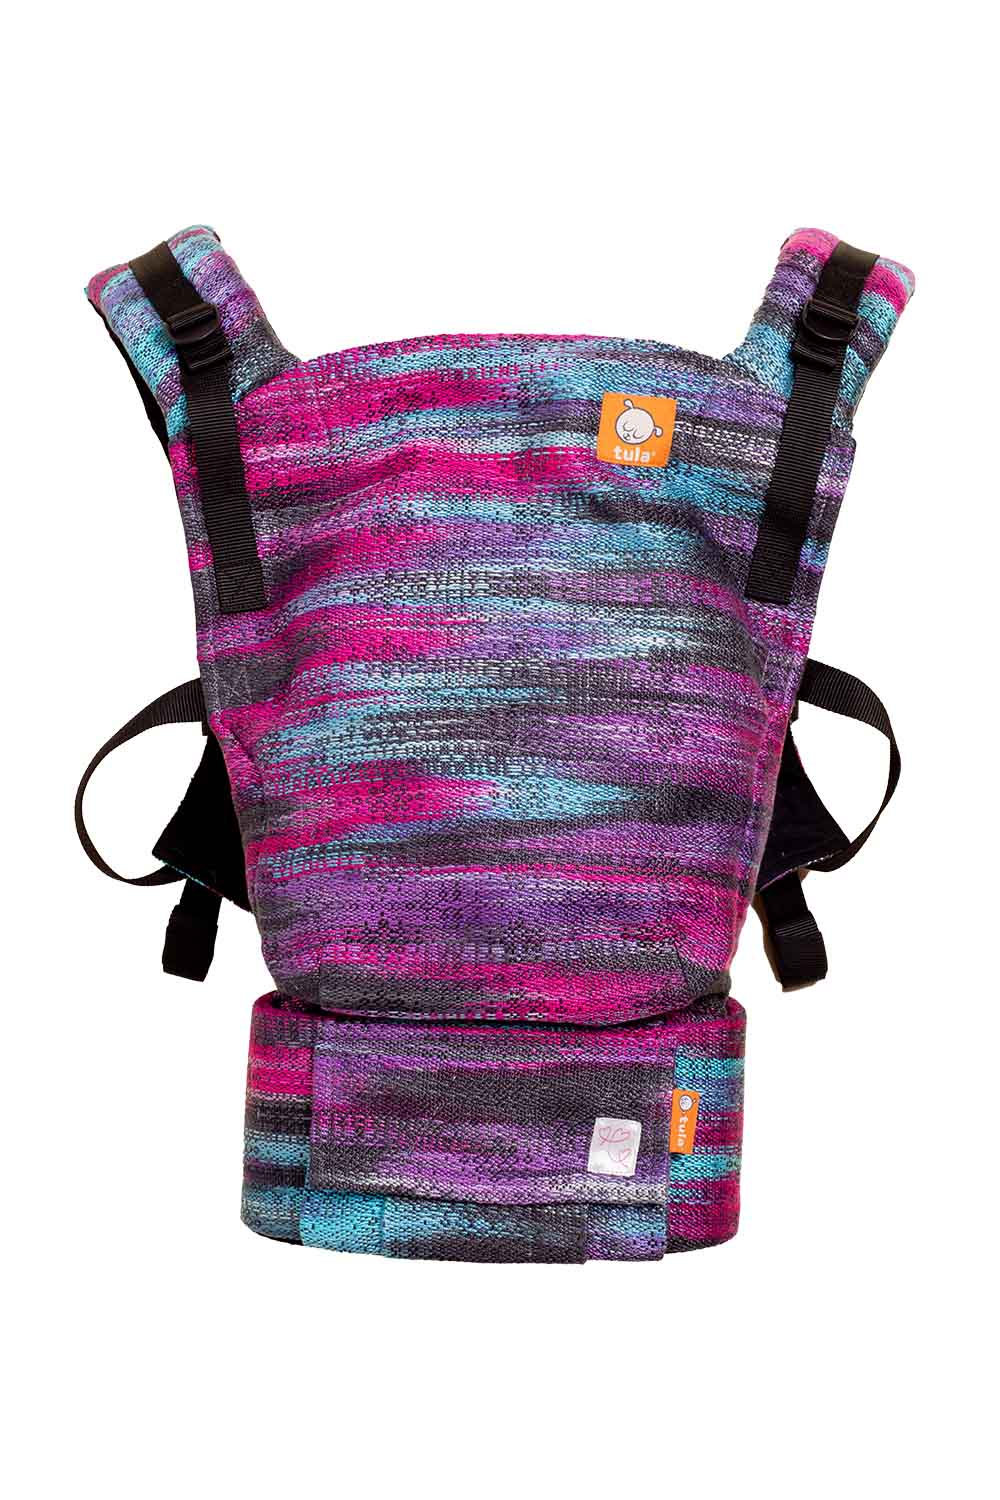 Nebula - Signature Handwoven Free-to-Grow Baby Carrier